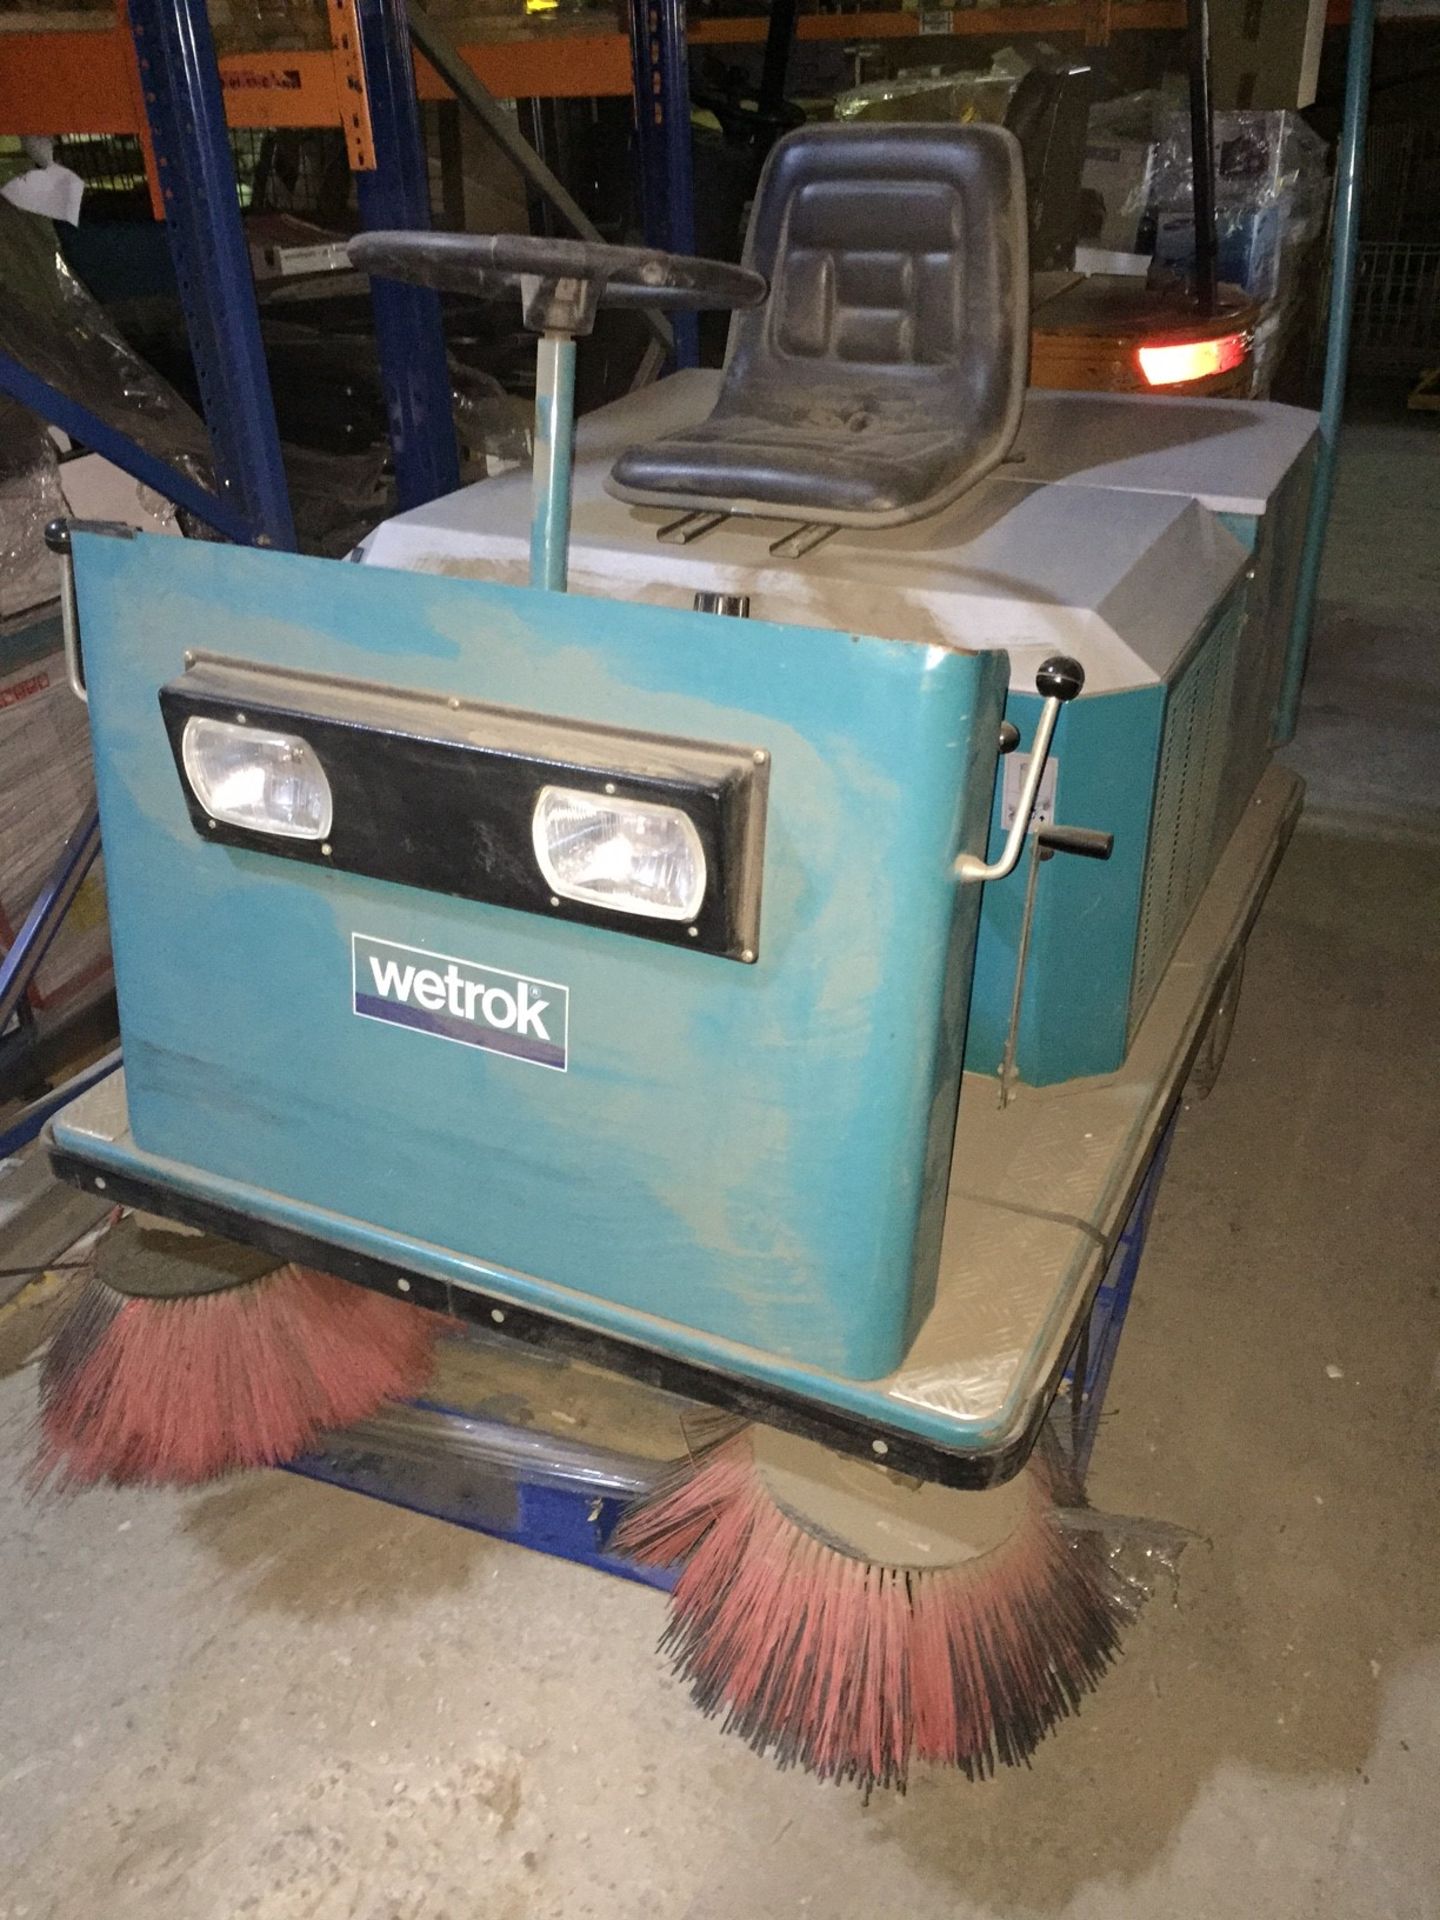 Wetrok Commercial Ride-On Floor Cleaning/Sweeping Machine - Complete With Charger and Key - Image 2 of 6